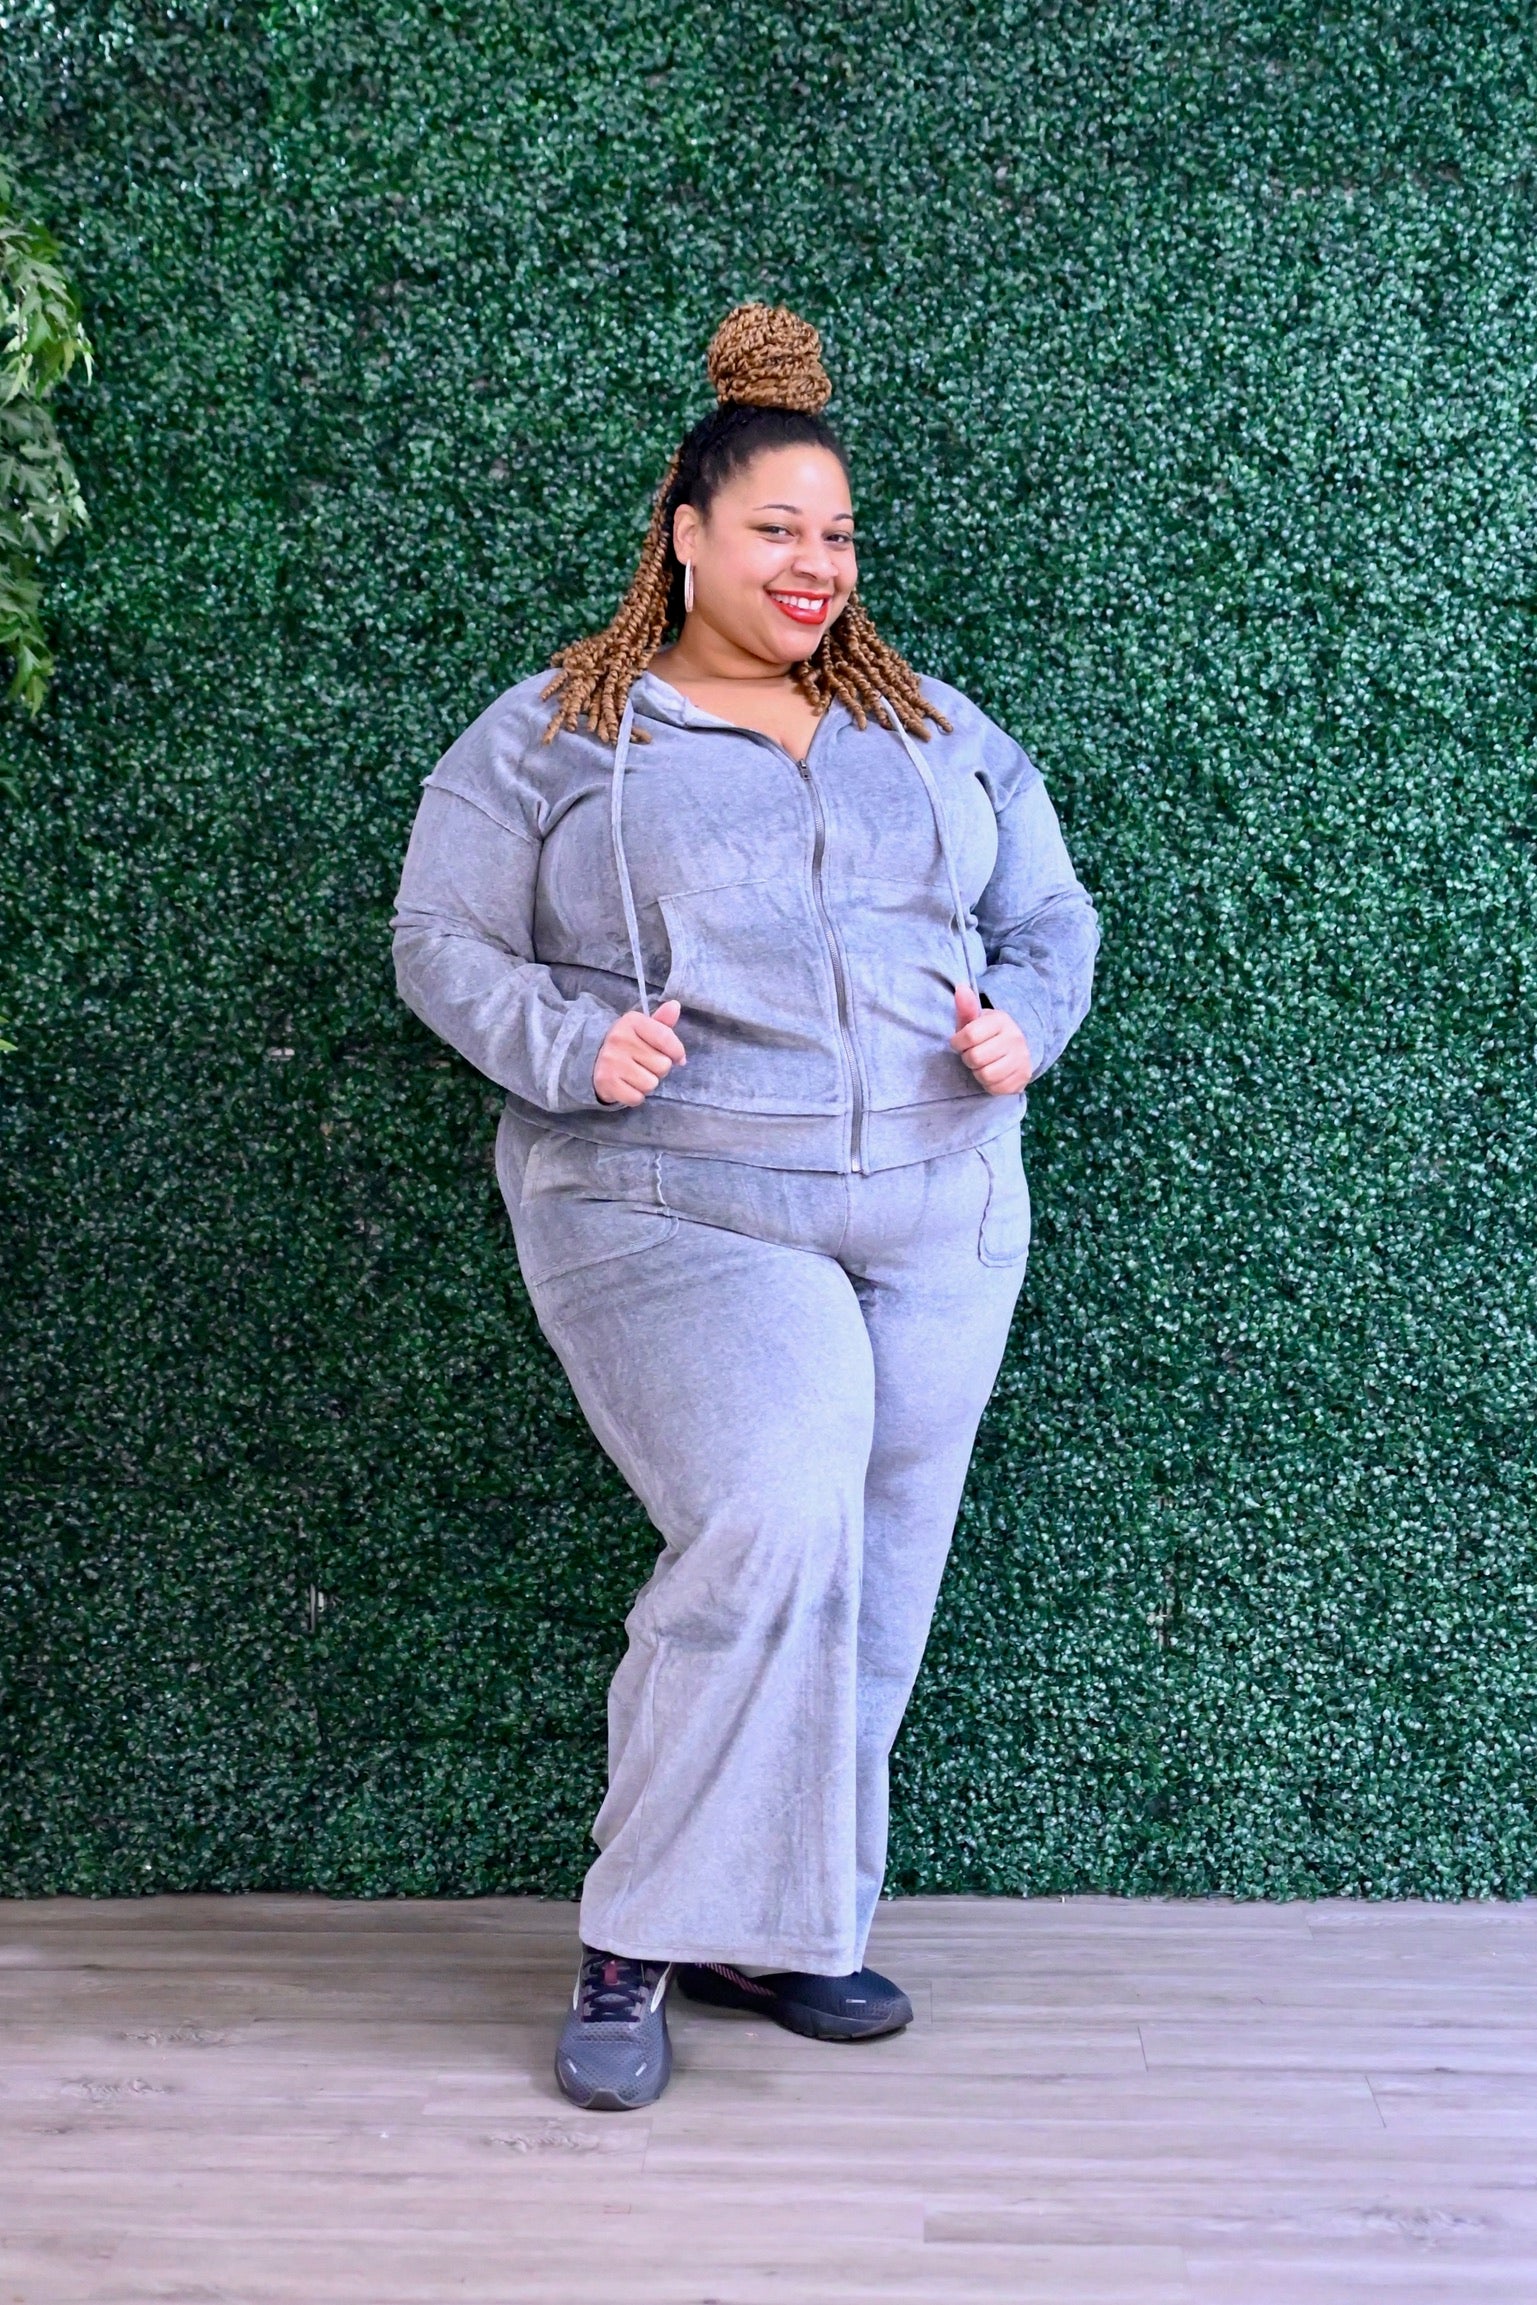 Curvy Girl Styles Boutique